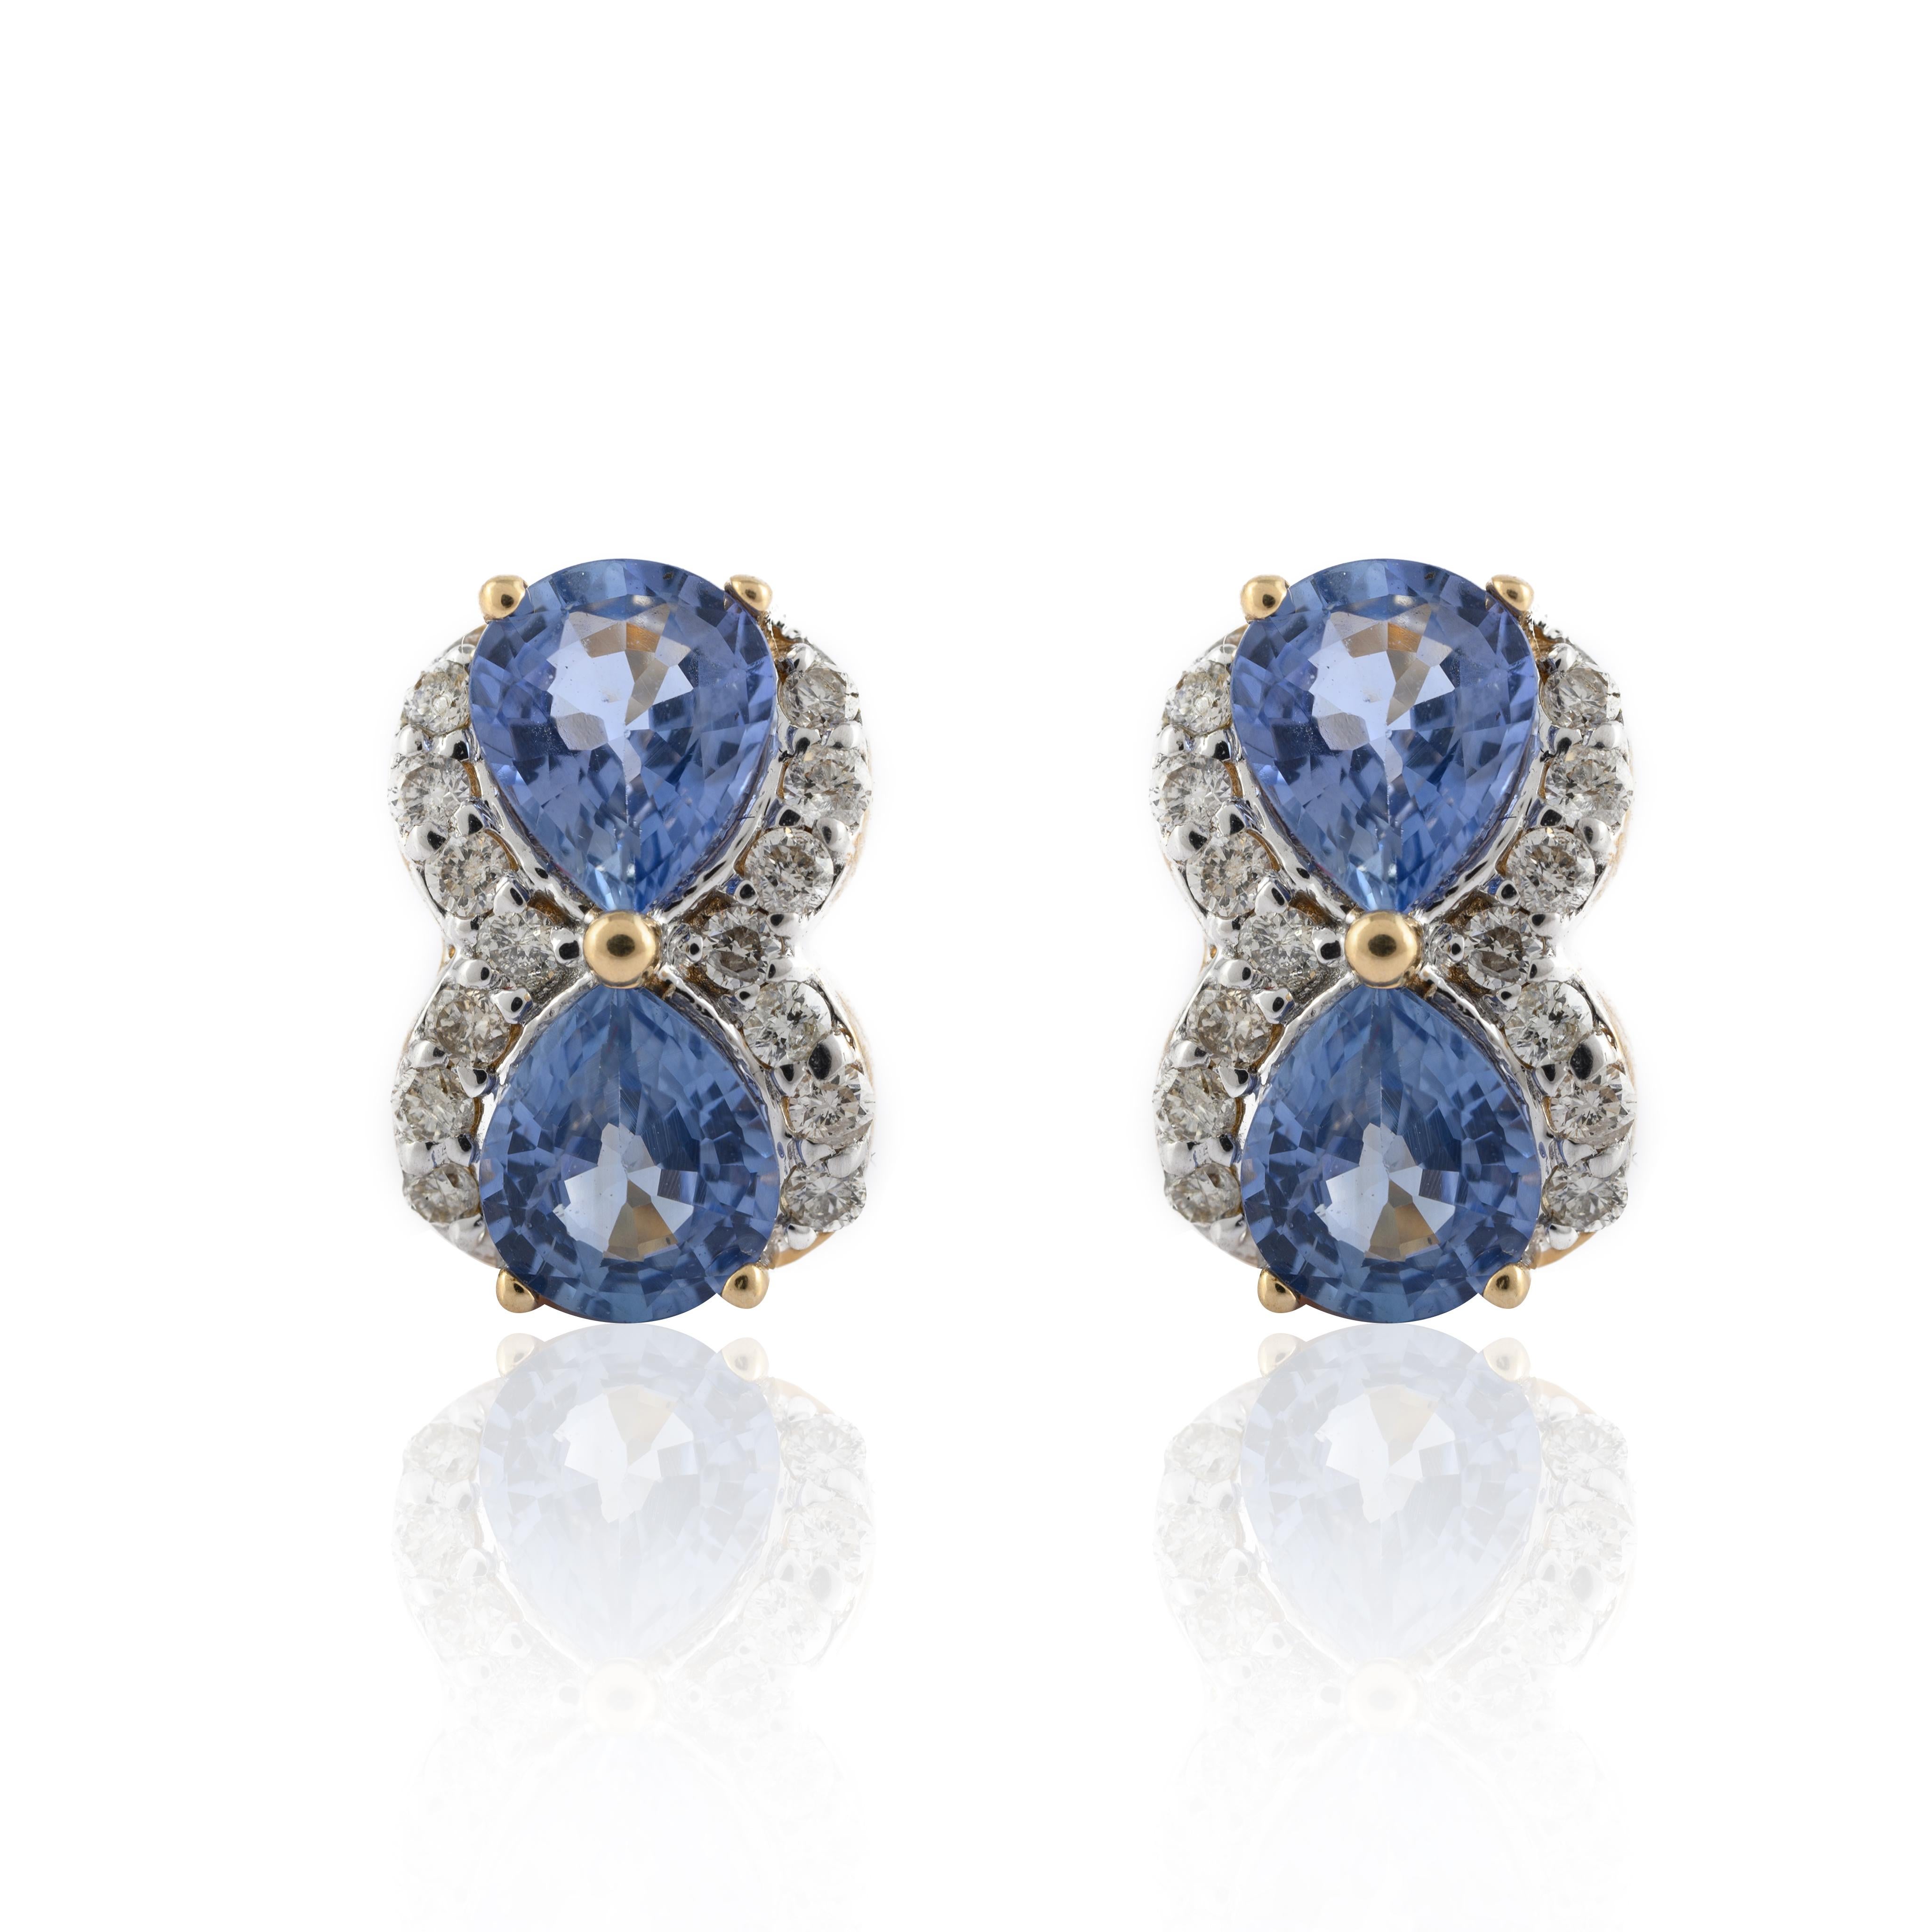 Natural Diamond and Blue Sapphire Pushback Stud Earrings in 14K Gold. Embrace your look with these stunning pair of earrings suitable for any occasion to complete your outfit.
Sapphire stimulates concentration and reduces stress. 
Featuring 0.42